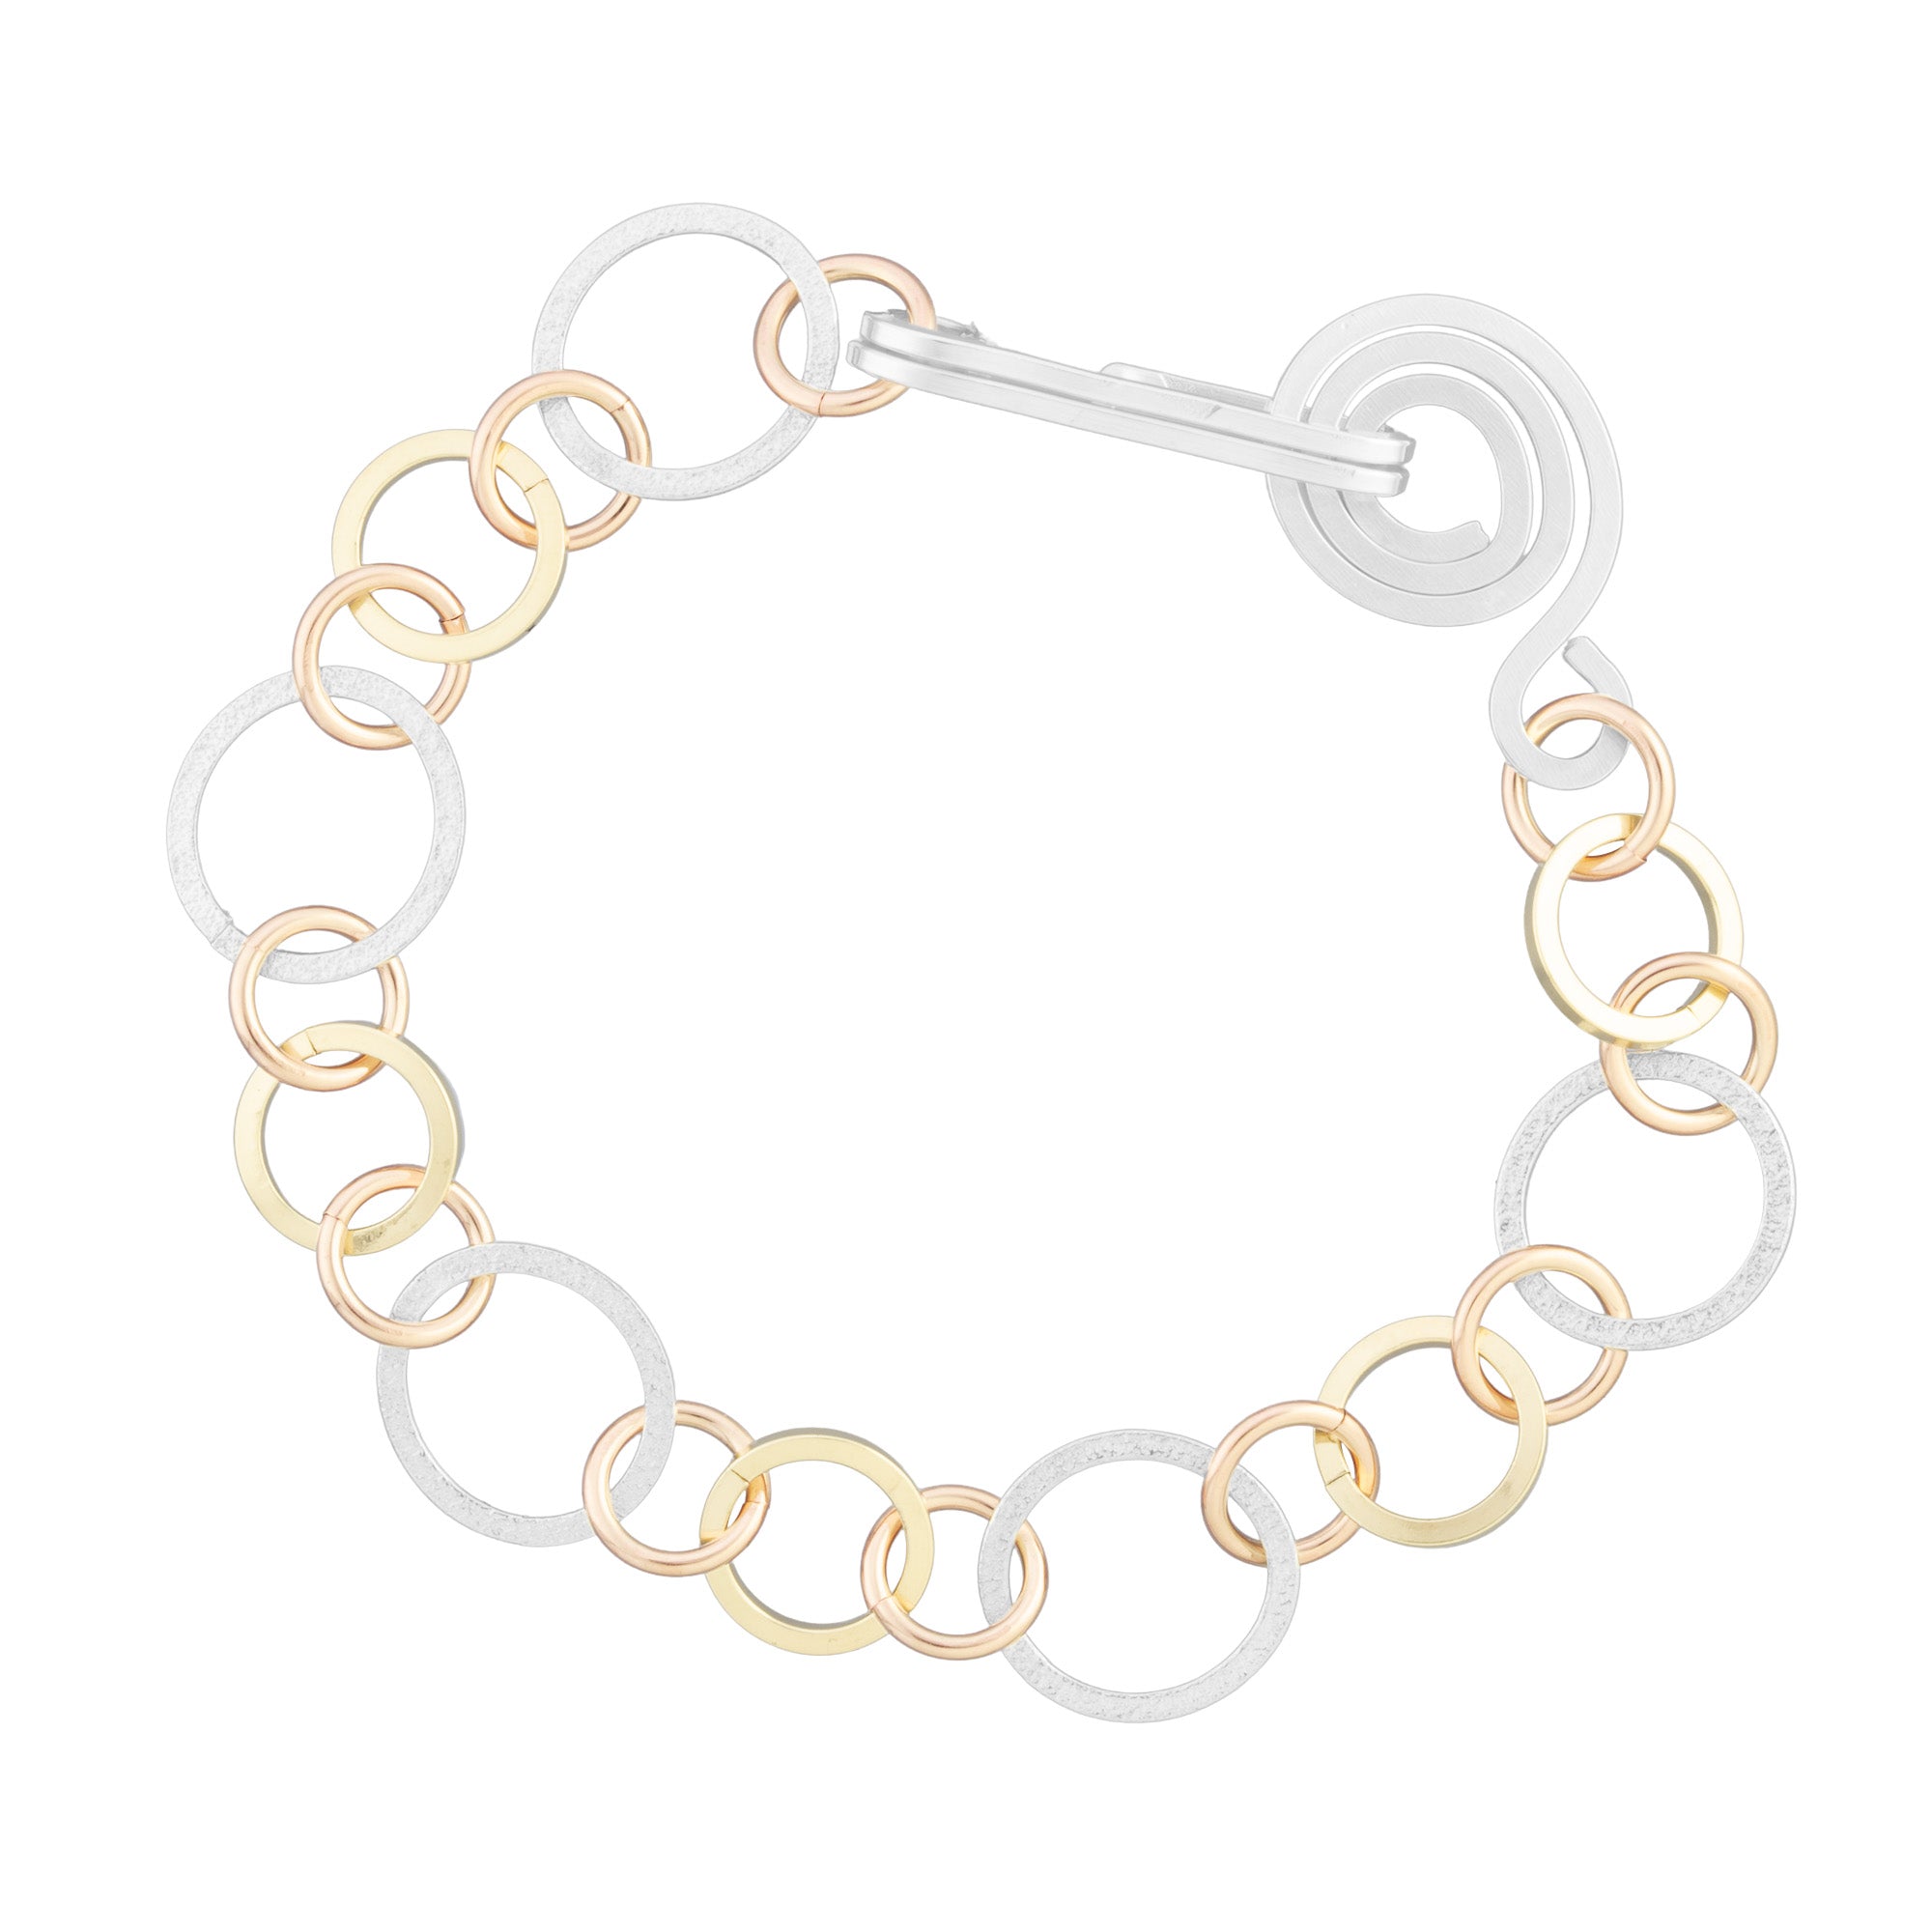 Handcrafted Tri Color Open Link Chain Bracelet in Sterling Silver and 14K Yellow and Rose Gold Fill